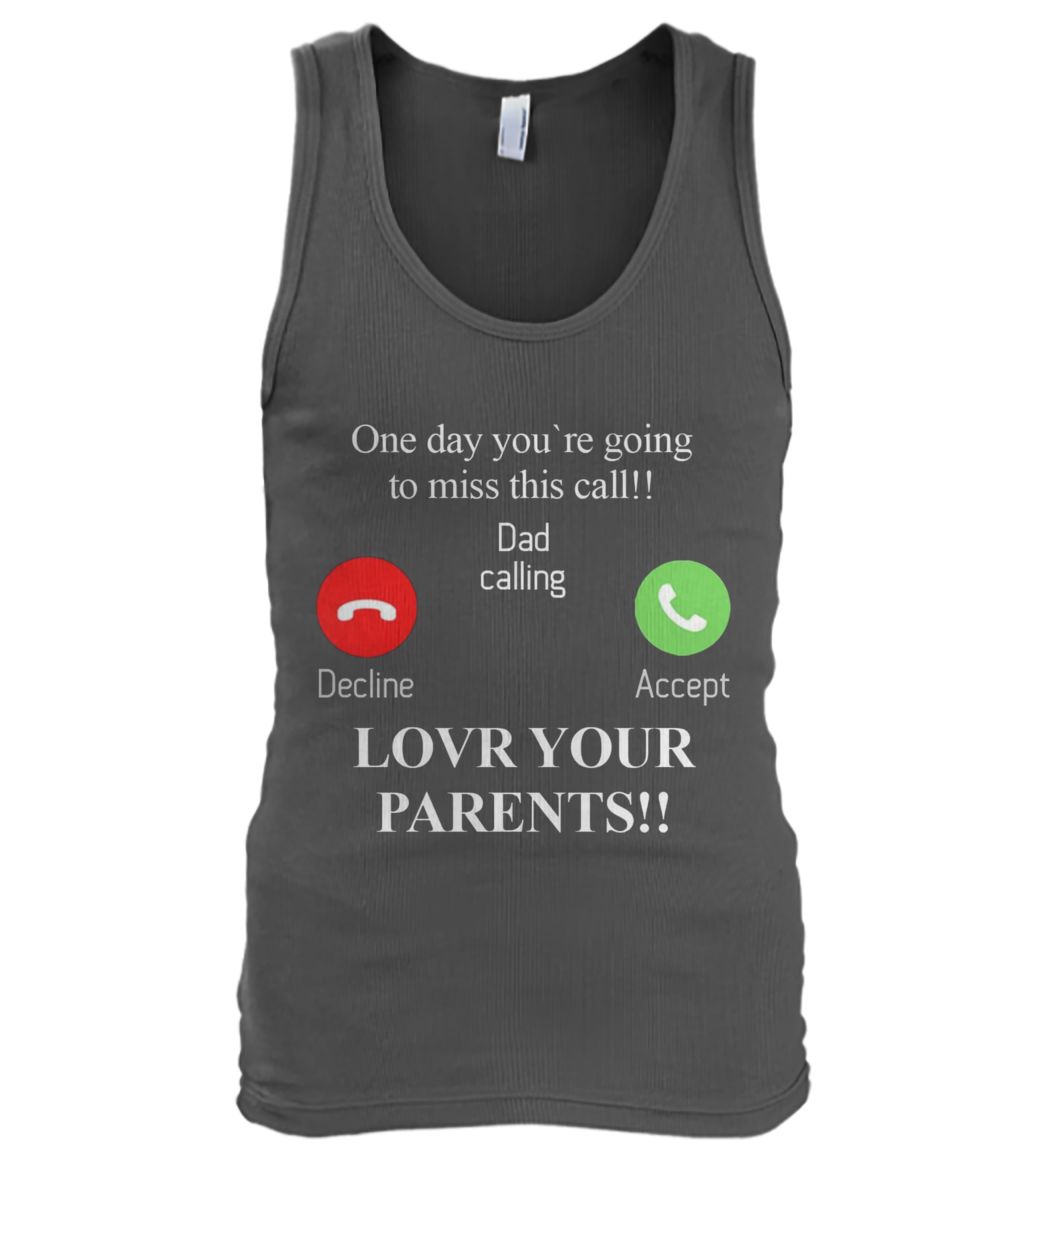 One day you're going to miss this call dad calling men's tank top